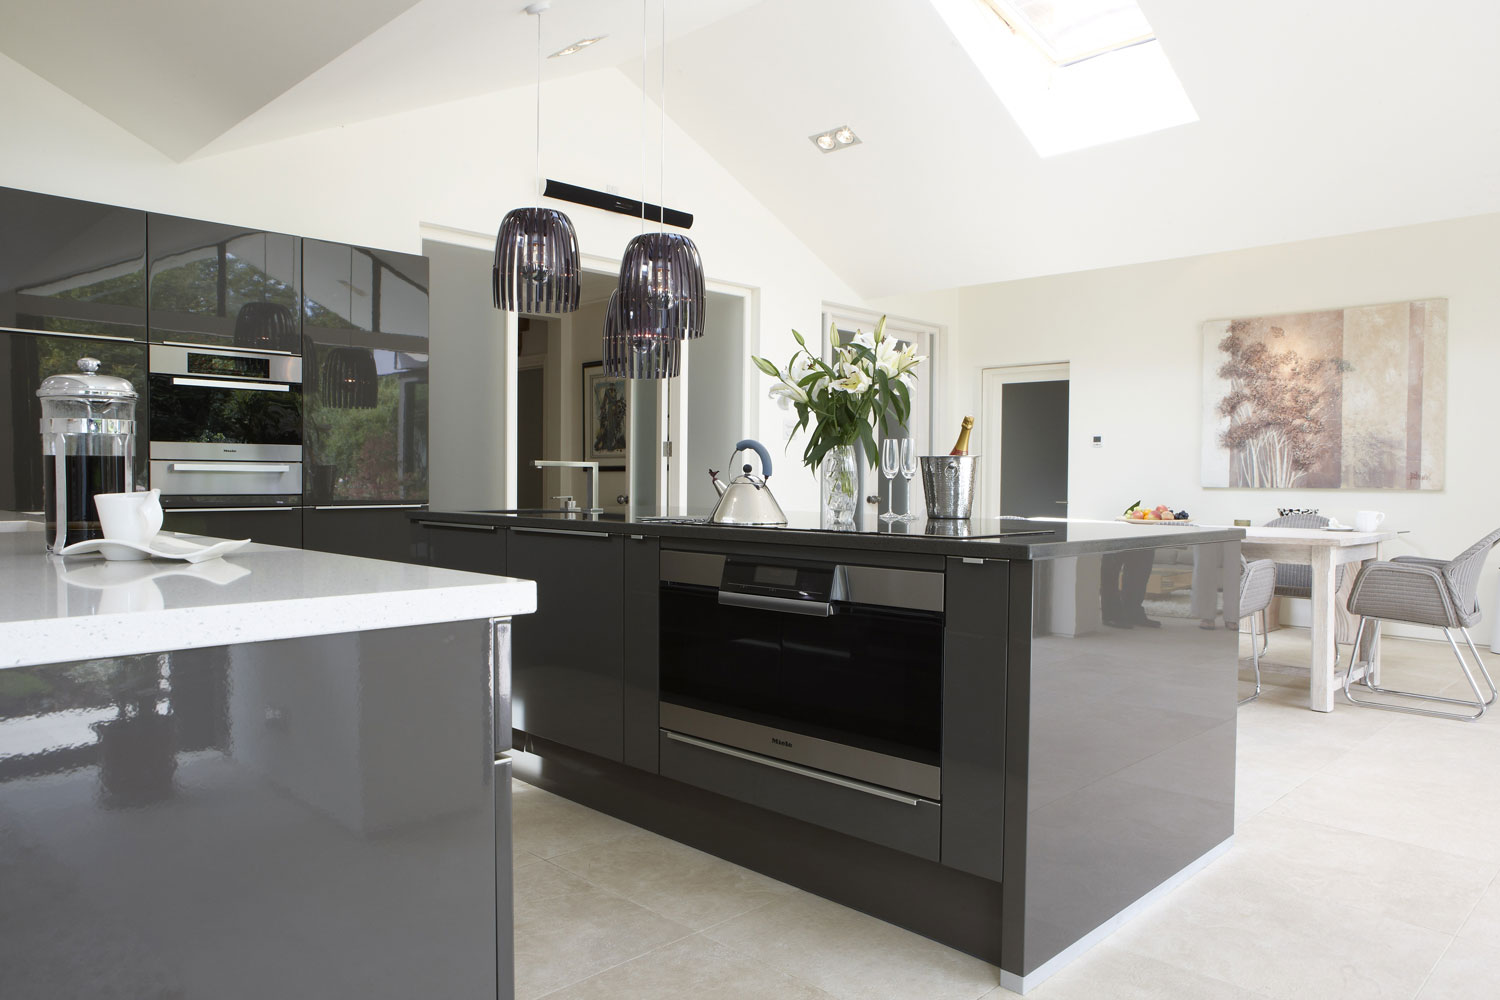 Hitchin Kitchen by mace architects | London Residential Photographer | Property Photographer